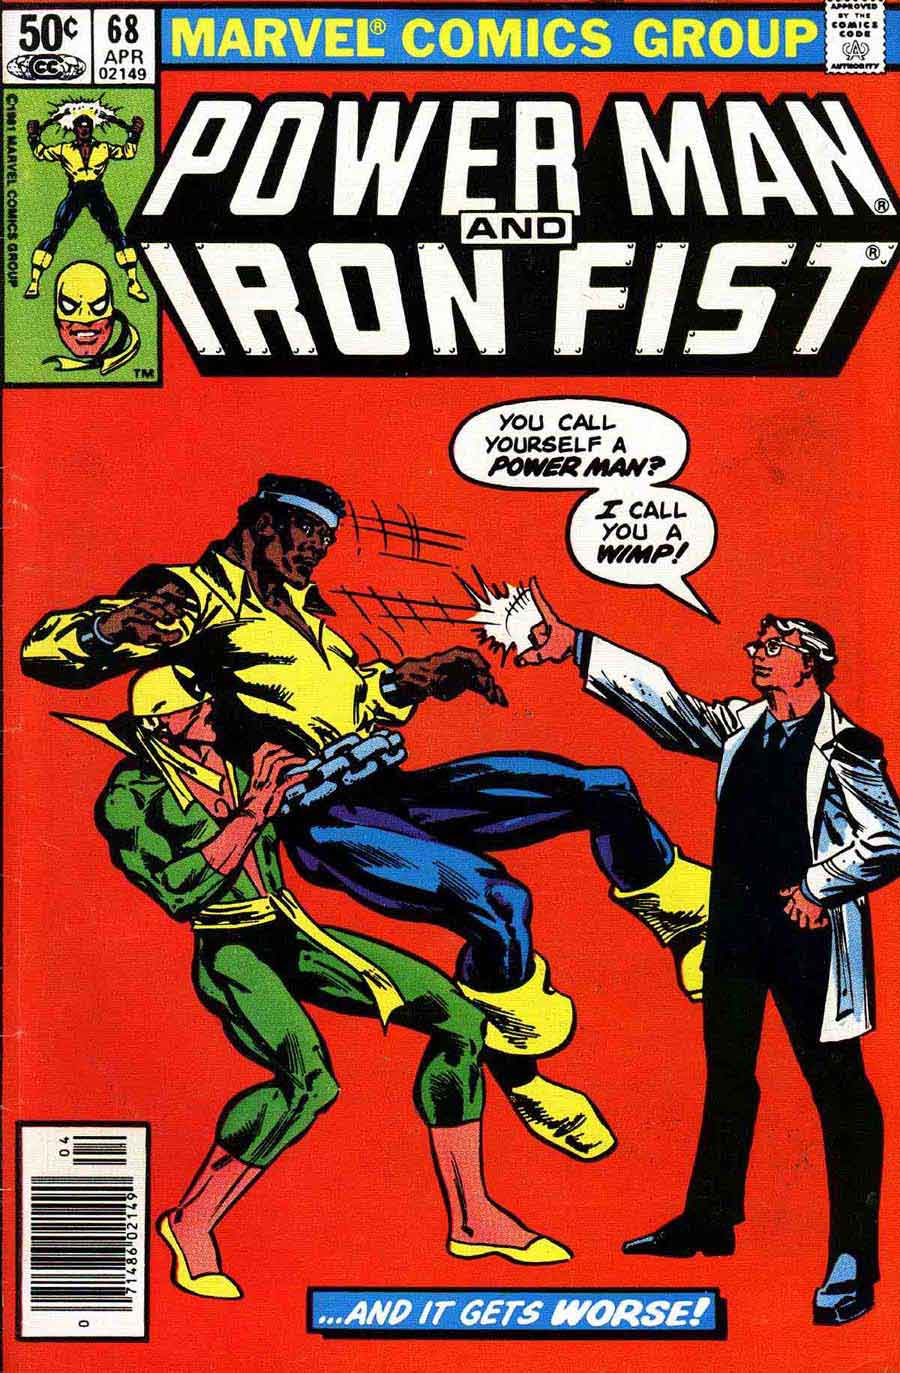 Power Man and Iron Fist #68 marvel 1980s comic book cover art by Frank Miller